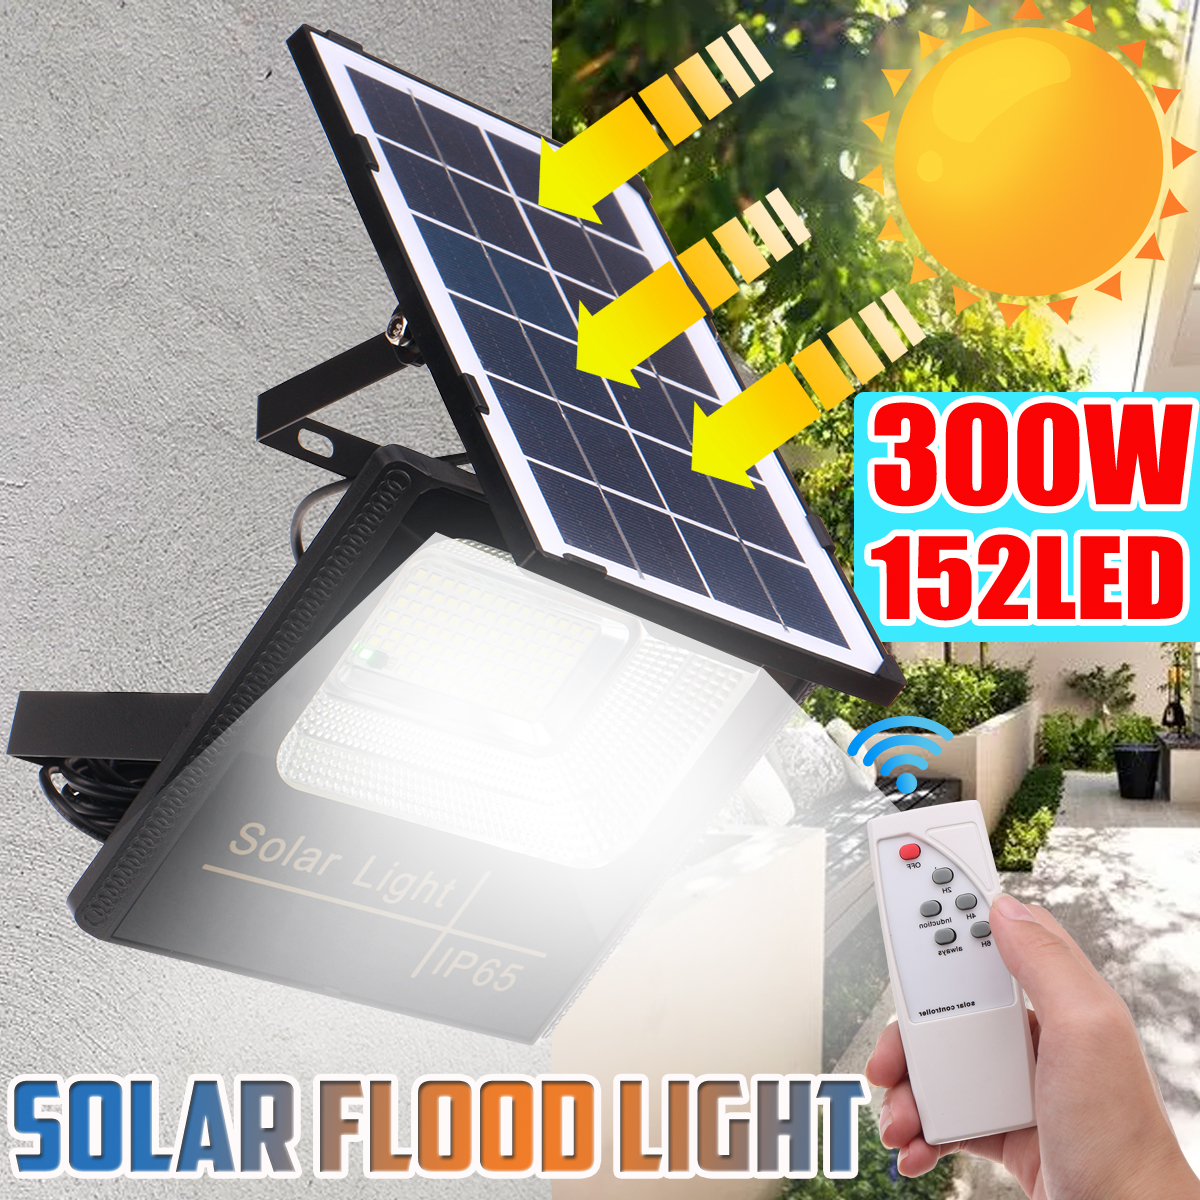 300W-Solar-Powered-LED-Street-Wall-Flood-Lamp-Garden-Spotlight-with-5M-Extension-Wire--Remote-Contro-1720586-1